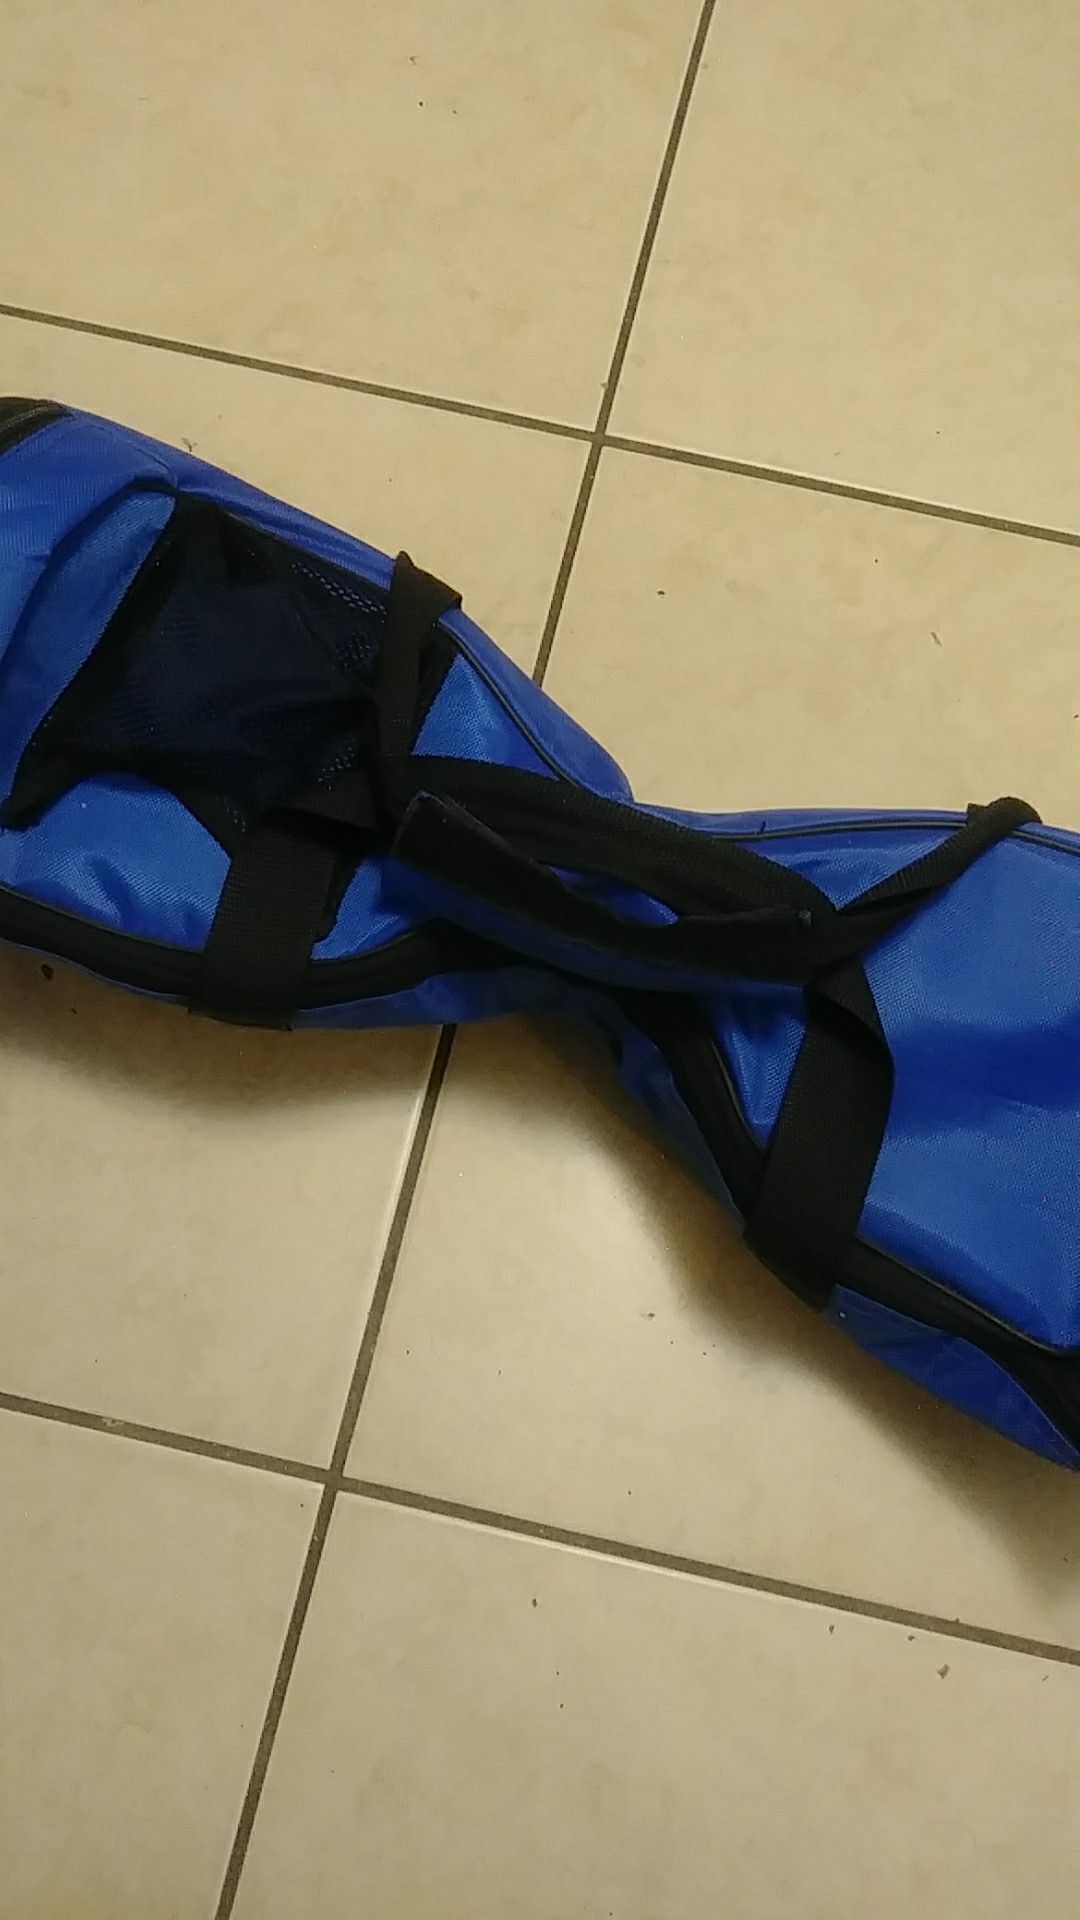 Blue Hoverboad with bag